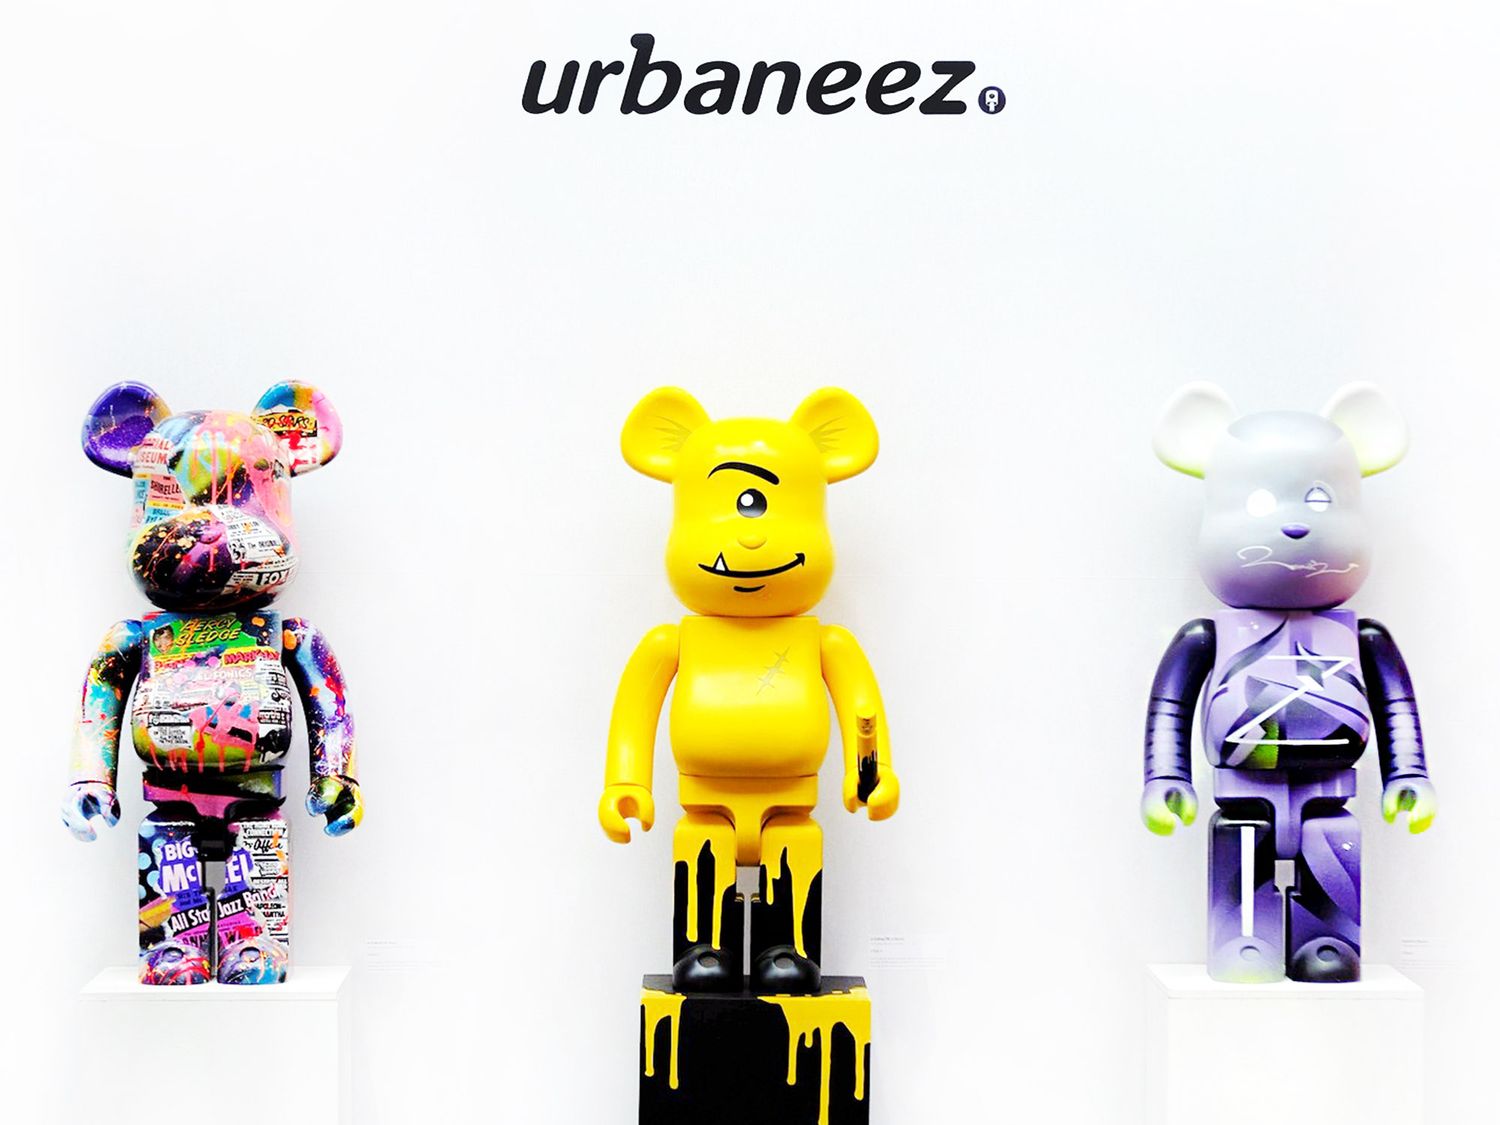 On the occasion of this first participation, Urbaneez unveiled in exclusivity some Bearbricks from its forthcoming collection, including those by artists Jo Di Bona, Le Cyklop and Zurik.